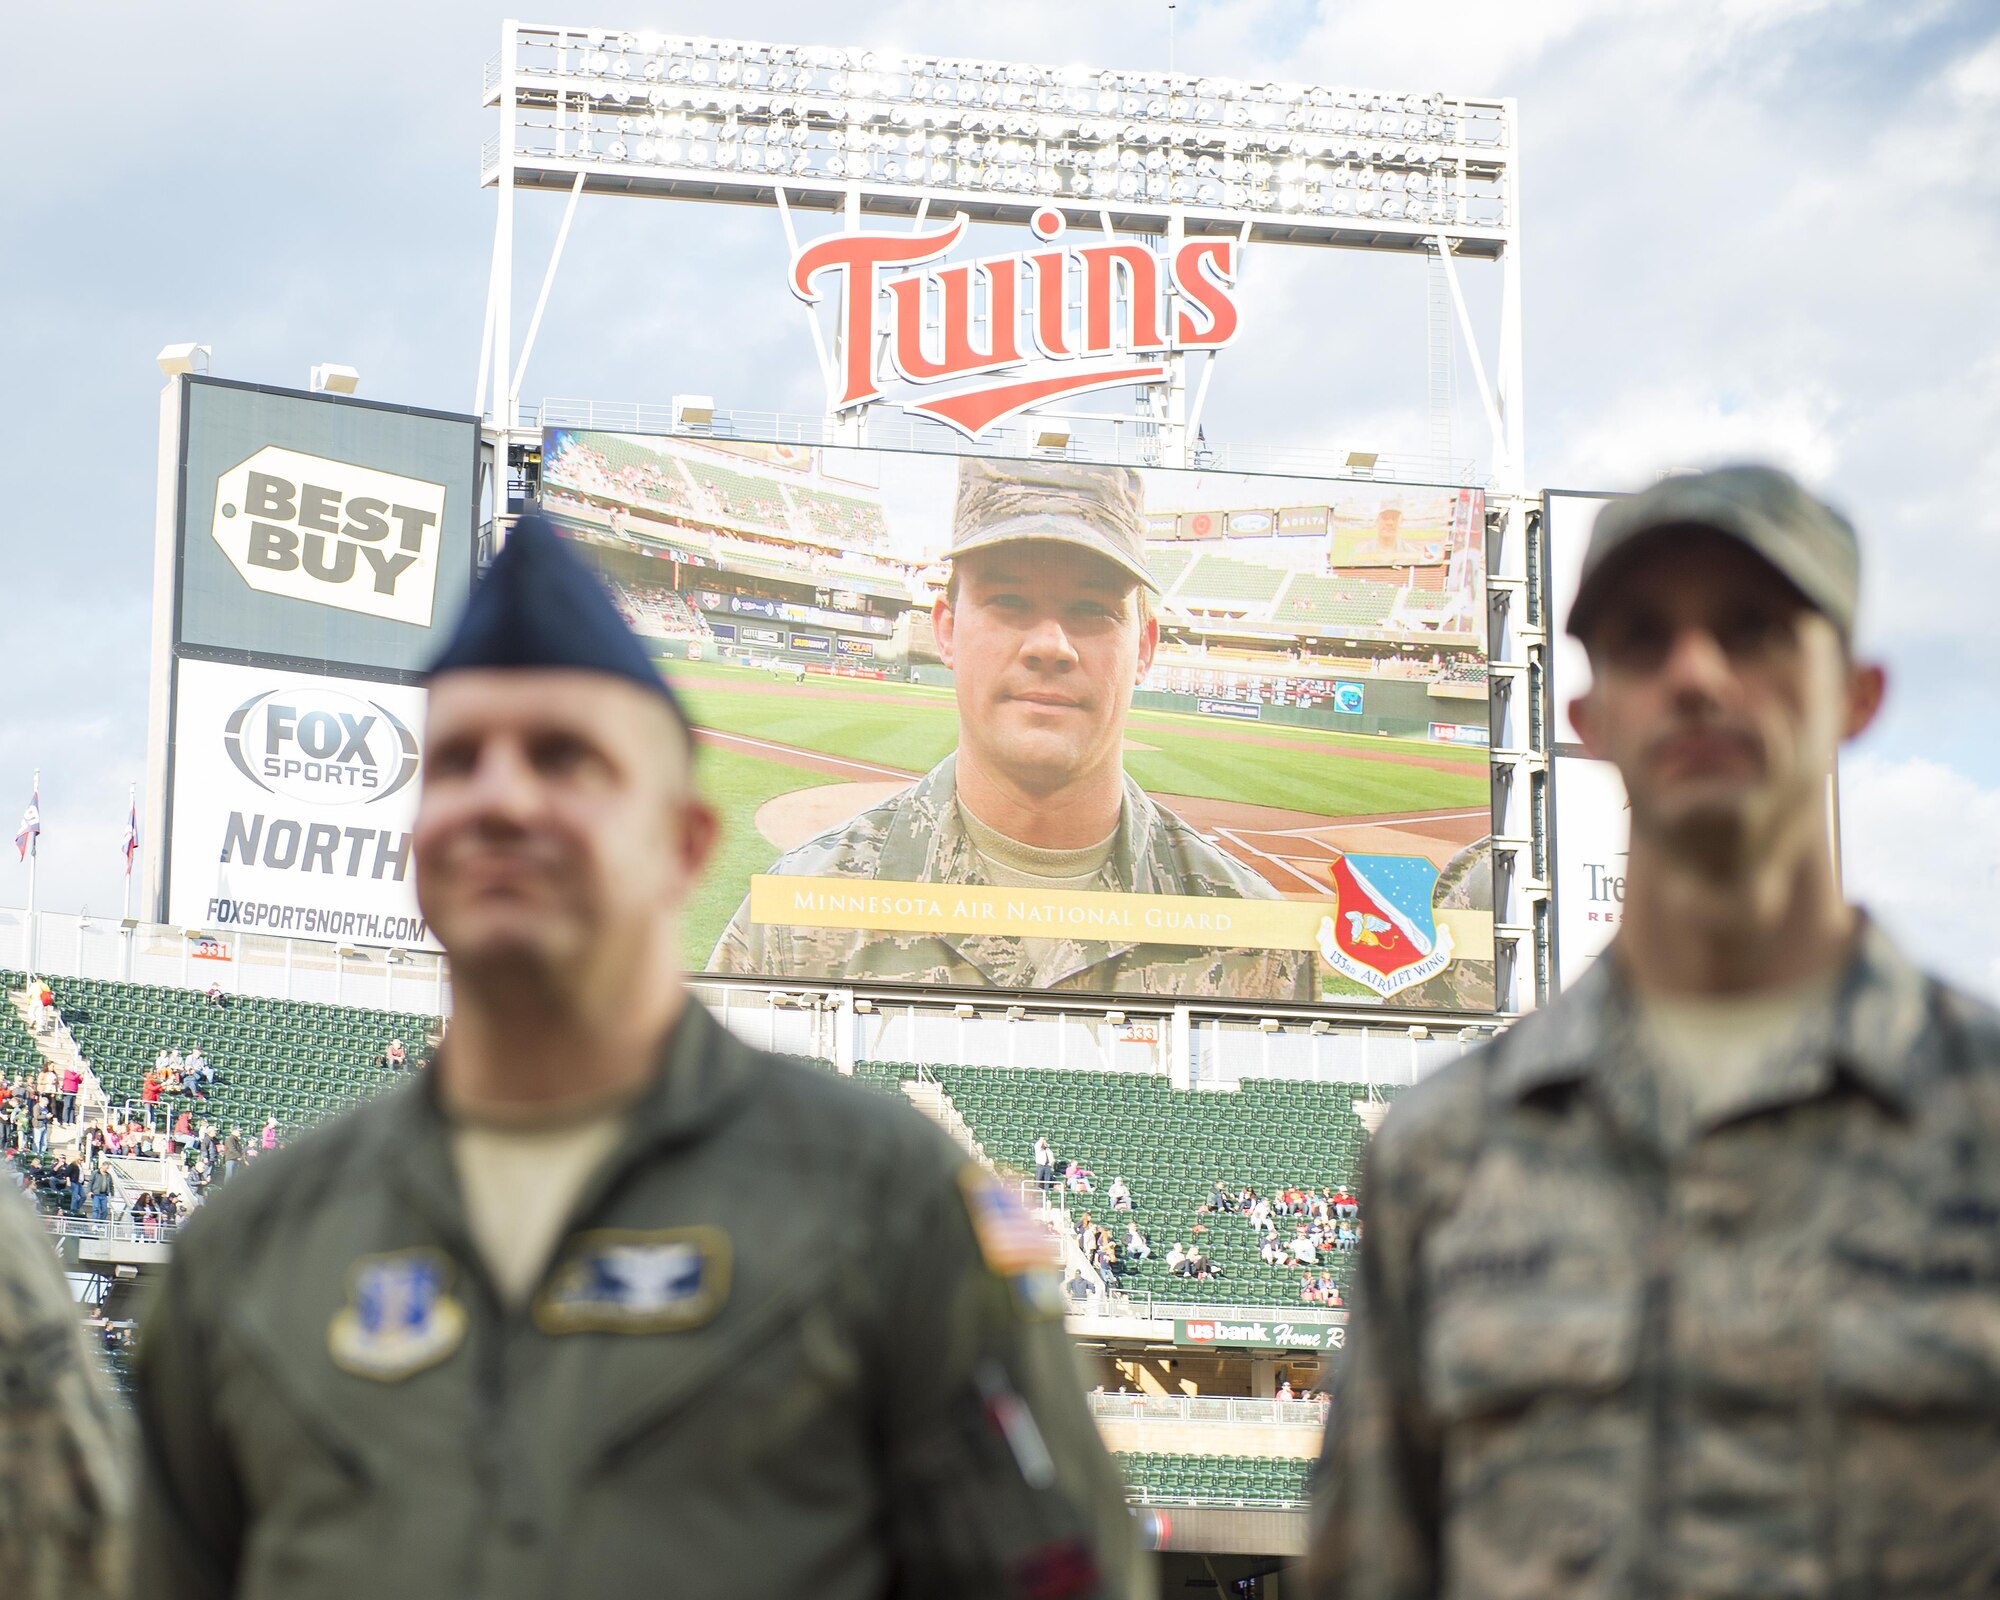 Outstanding airmen from the 133rd Airlift Wing were recognized before a Minnesota Twins home game at Target Field in Minneapolis, Minn., May 2, 2017. These stellar airman were selected for being dedicated to their missions, while being leaders in both the Minnesota Air National Guard and in their communities.
(U.S. Air National Guard photo by Tech. Sgt. Austen R. Adriaens/Released)